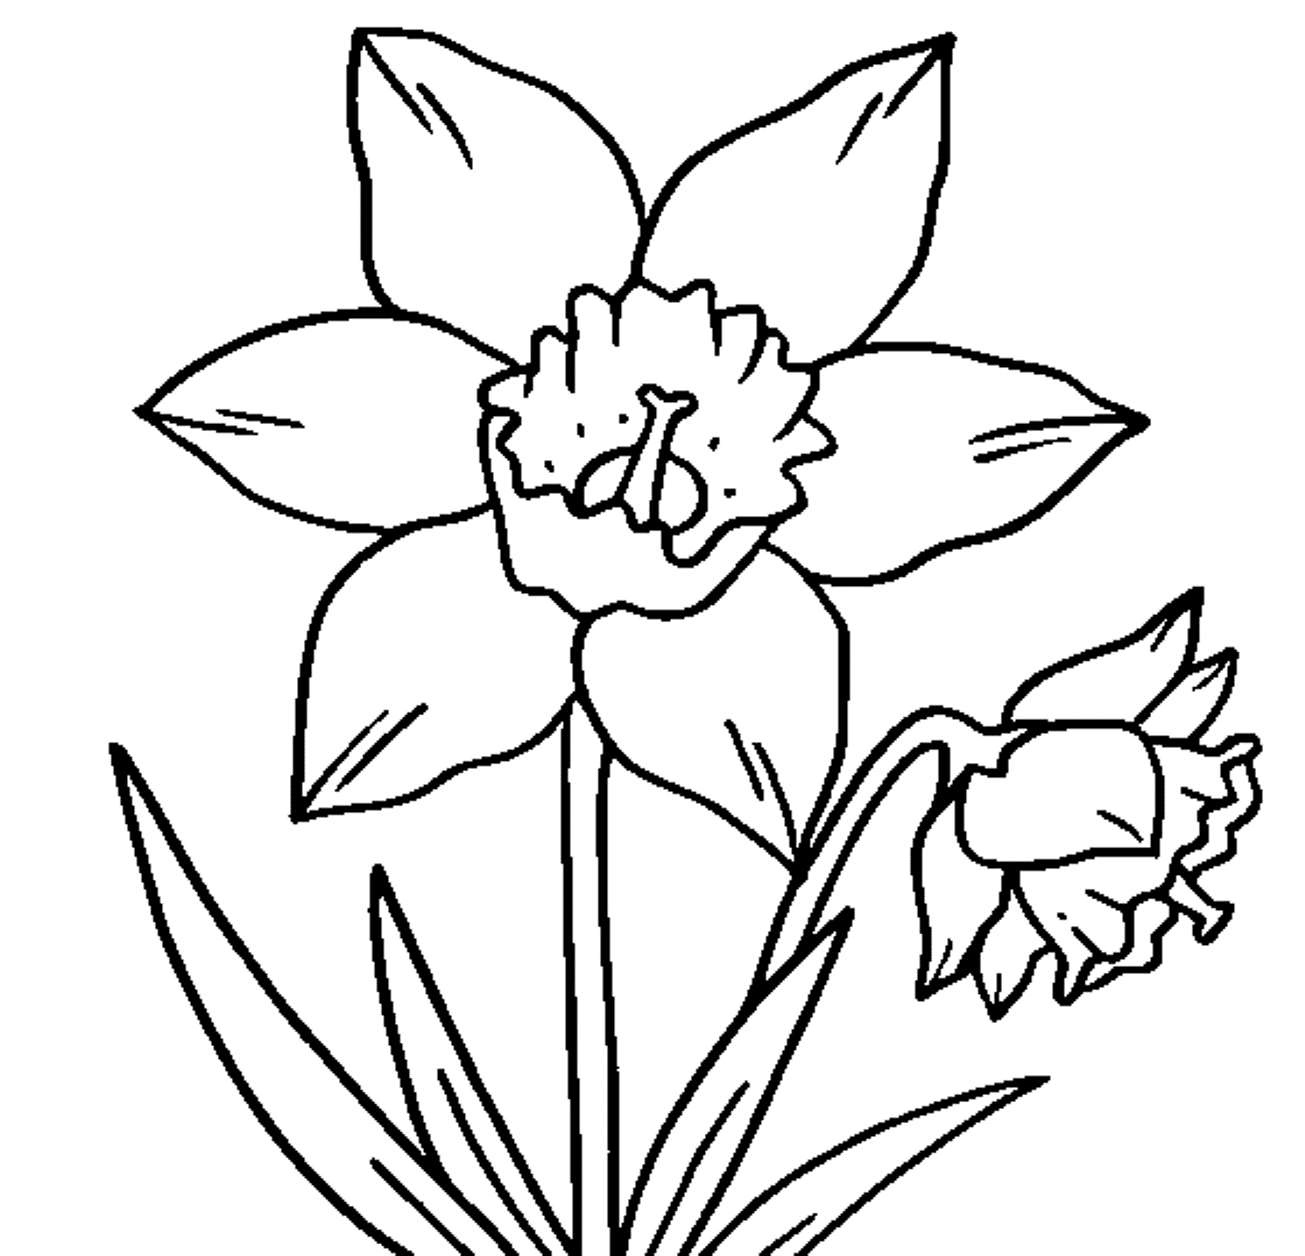 Daffodil Flower Coloring Page | Flower Coloring pages of ...